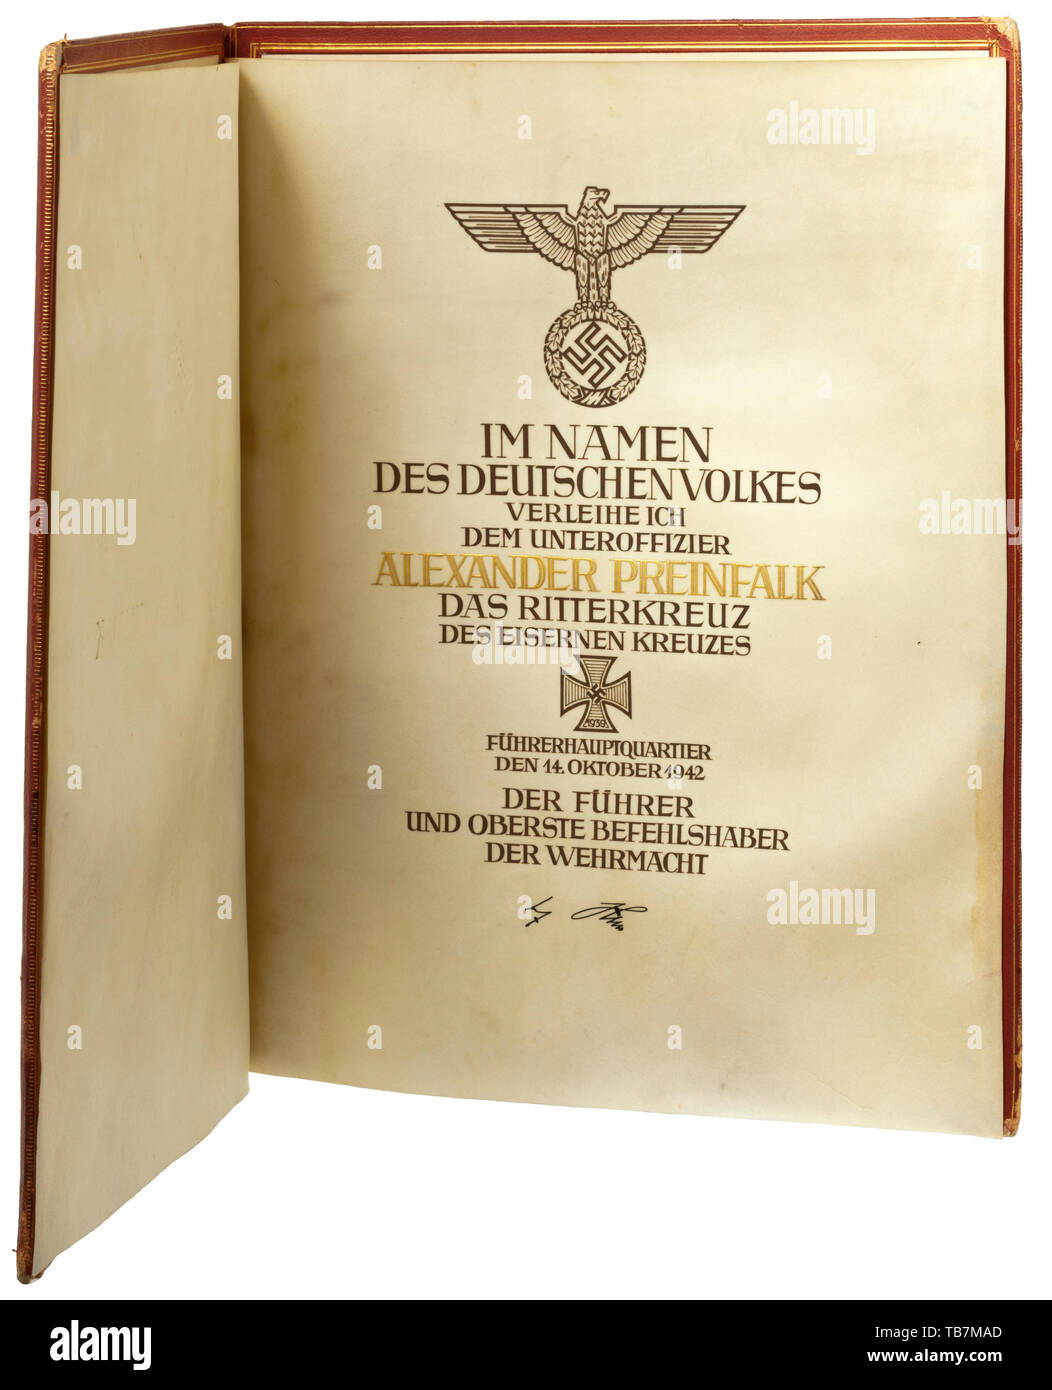 Oberfeldwebel Alexander Preinfalk - an award document for the fighter pilot with folder to the Knight's Cross of the Iron Cross of 1939, Large, double-paged parchment document with calligraphic national eagle and text dated 14 October 1942, the name of Alexander Preinfalk rendered in hand-executed gold lettering, beneath which is the signature in ink of Adolf Hitler. Slightly stained. Dimensions 43.3 x 35 cm. The award folder in red leather with a gold-embossed eagle on the front, the inside with decorative gold lines and parchment inserts, at the lower right edge the signa, Editorial-Use-Only Stock Photo